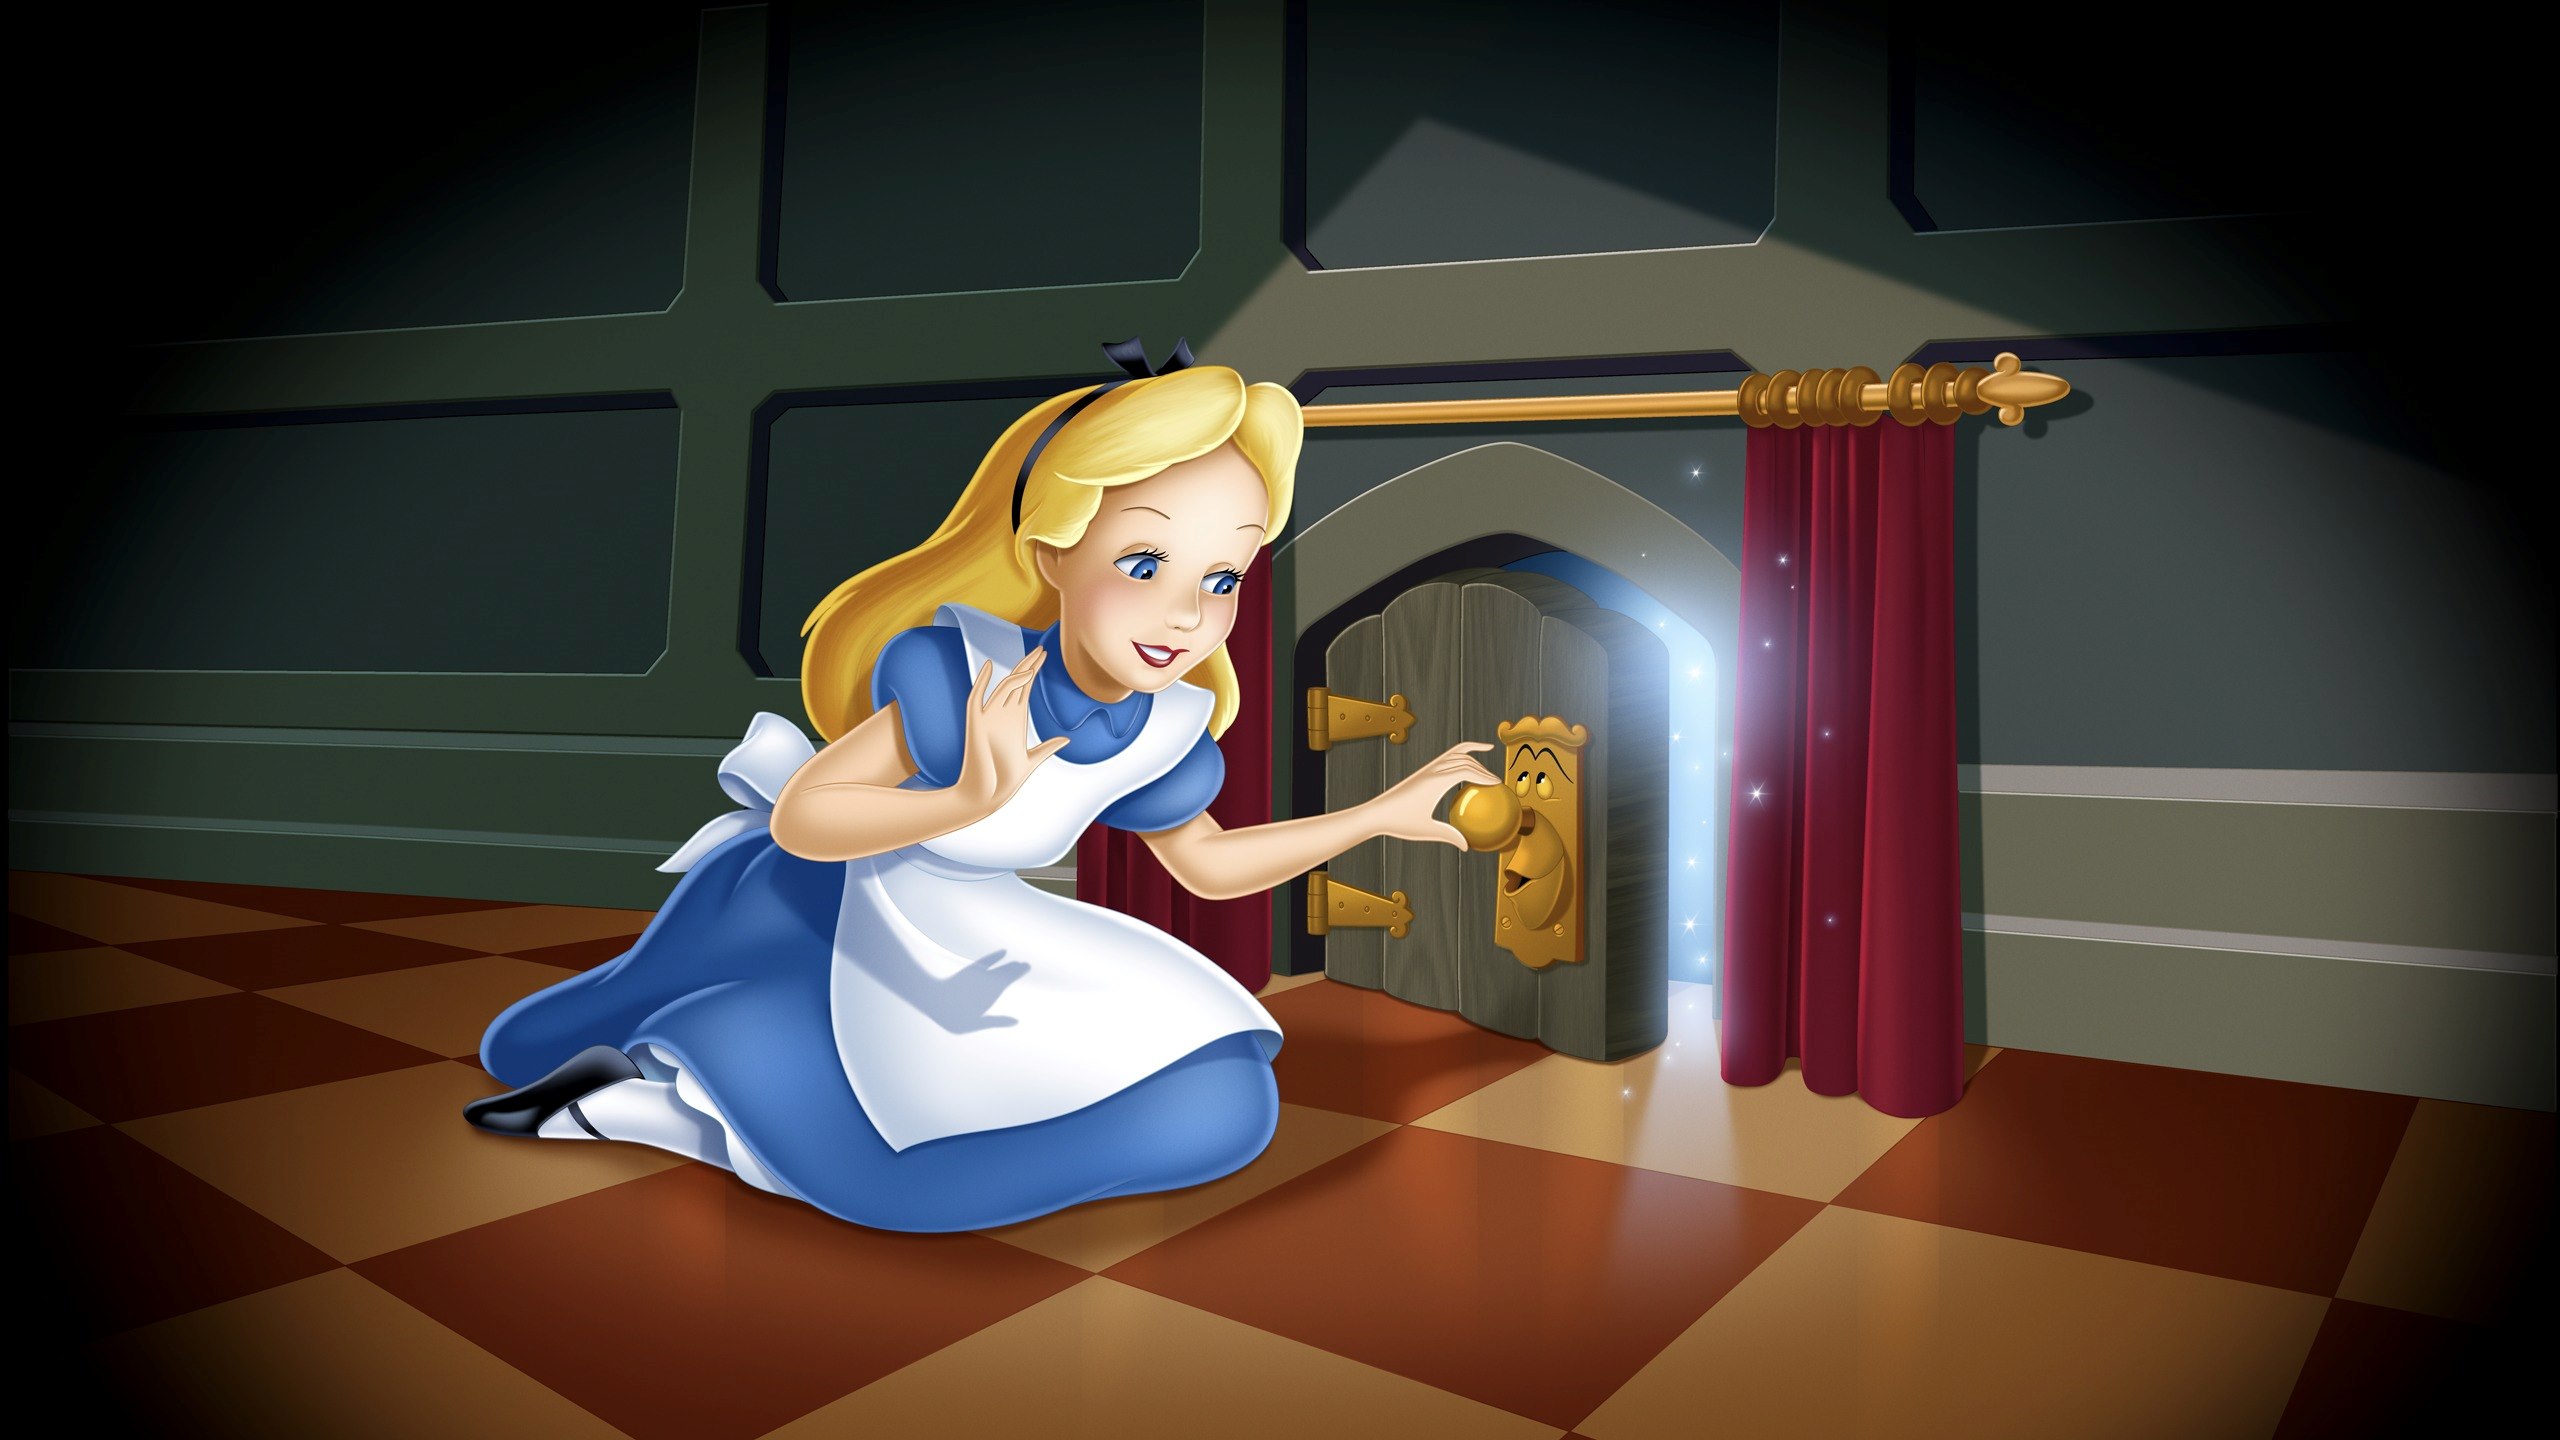 13 Facts About Alice (Disney's Alice In Wonderland) - Facts.net